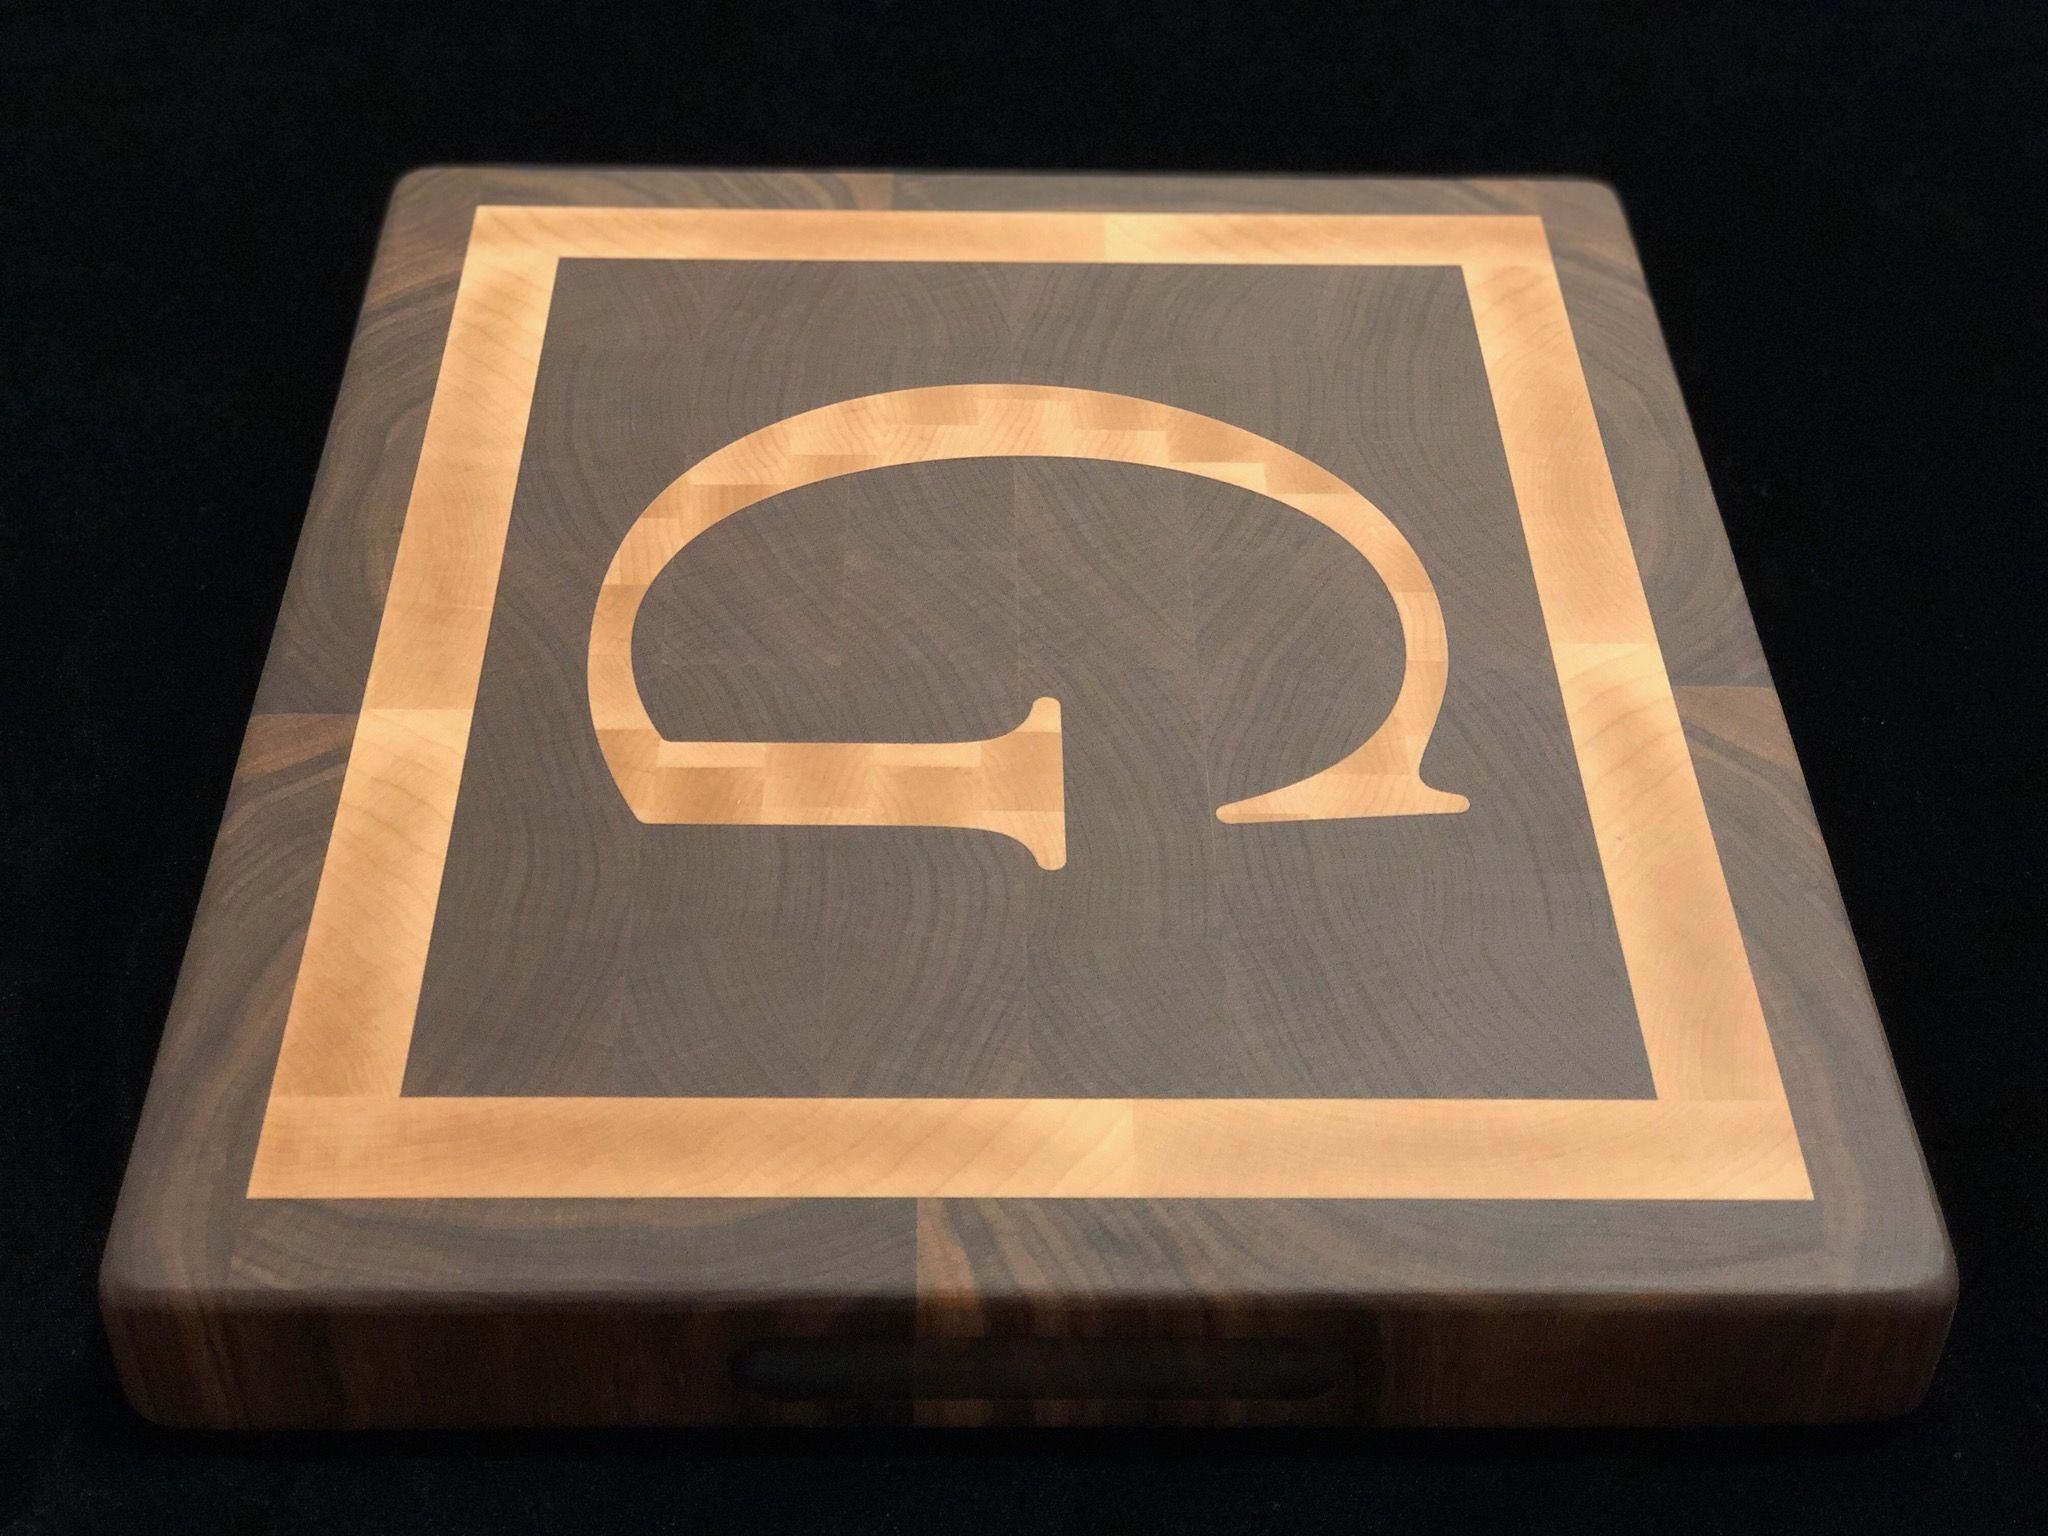 Buy Hand Crafted Black Walnut End Grain With Maple Monogram Made To Order From Magnolia Place 